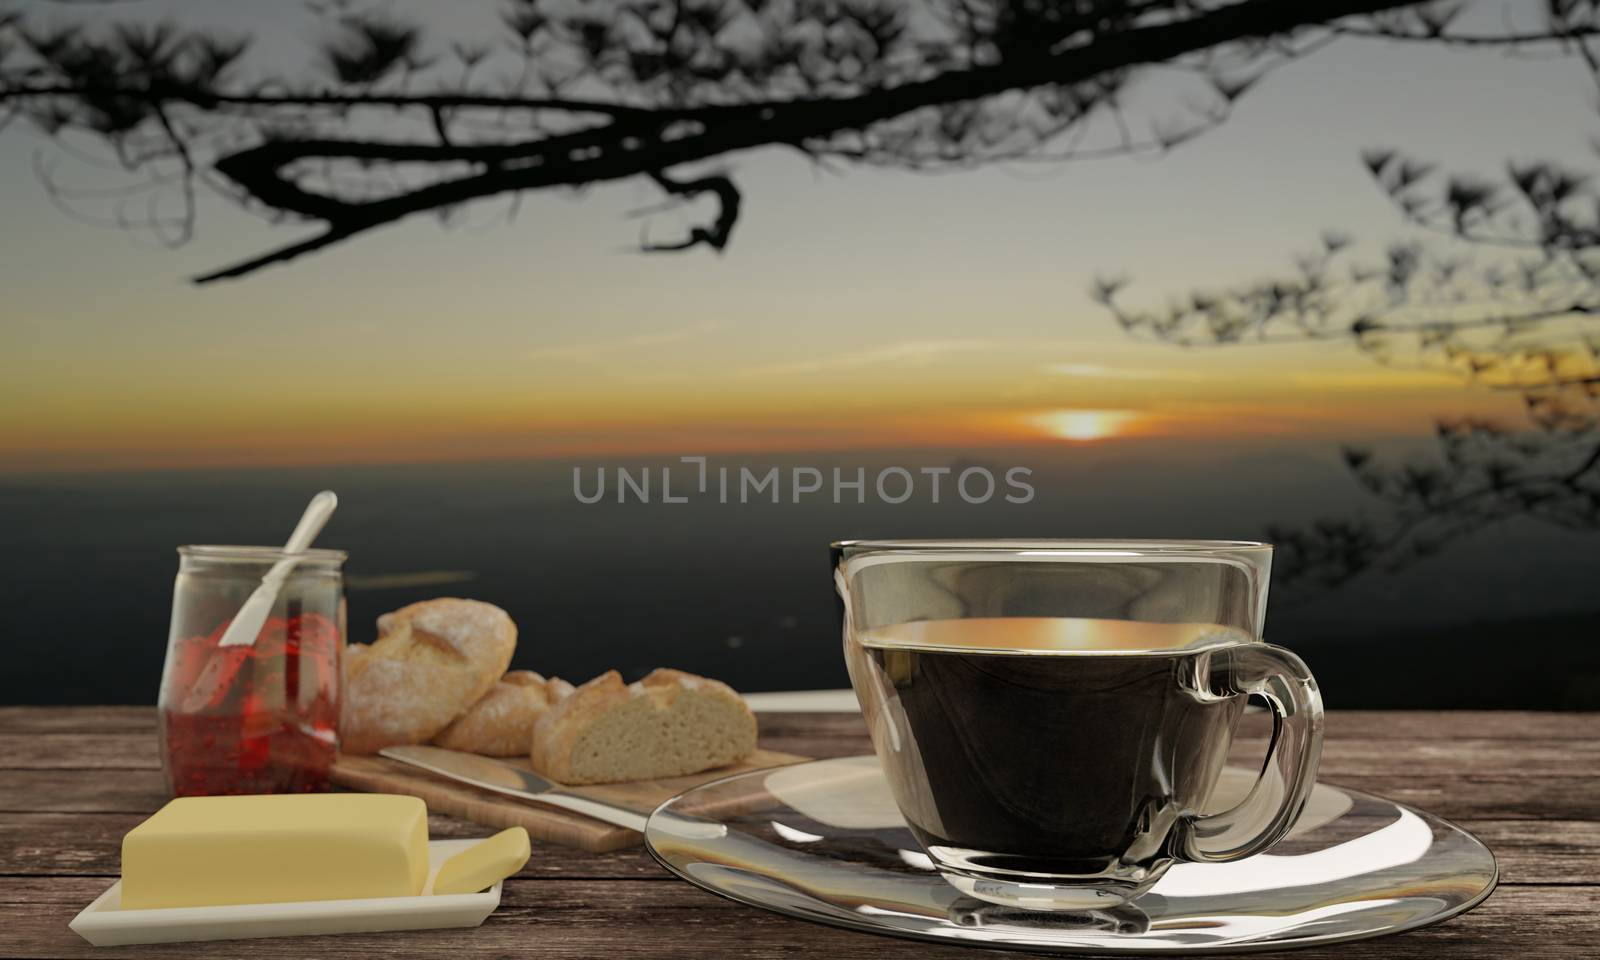 black coffee  in clear glass  and  Home made bread on butcher  for breakfast  concept on wooden table.   Background blur mountian view and sunrise. 3D rendering.